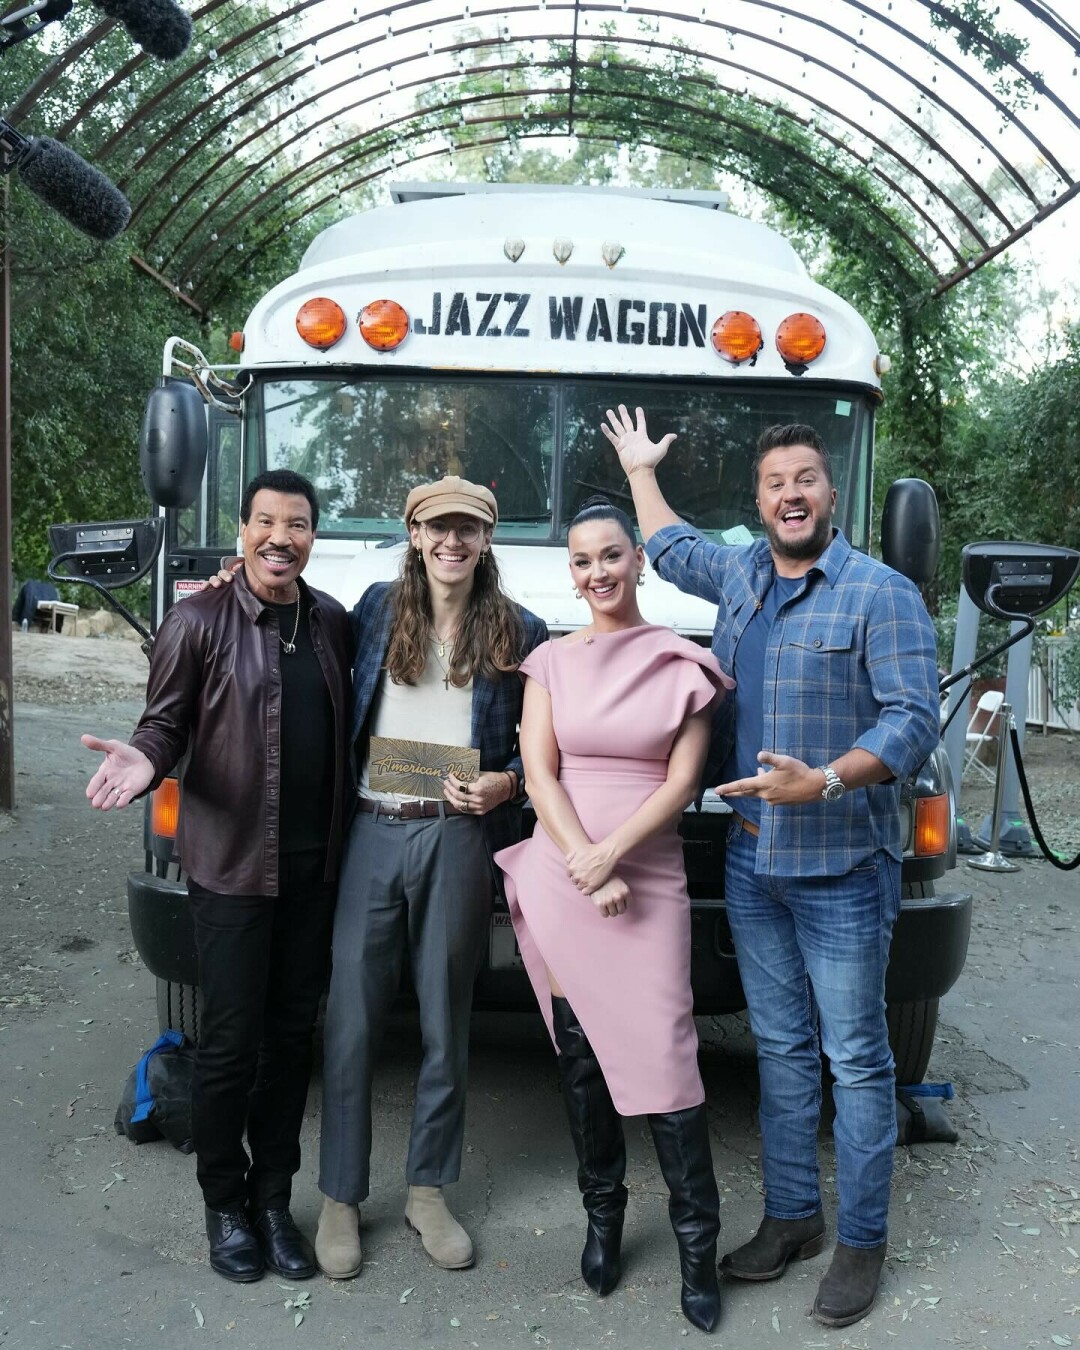 CJ with Lionel Richie, Katy Perry, and Luke Bryan